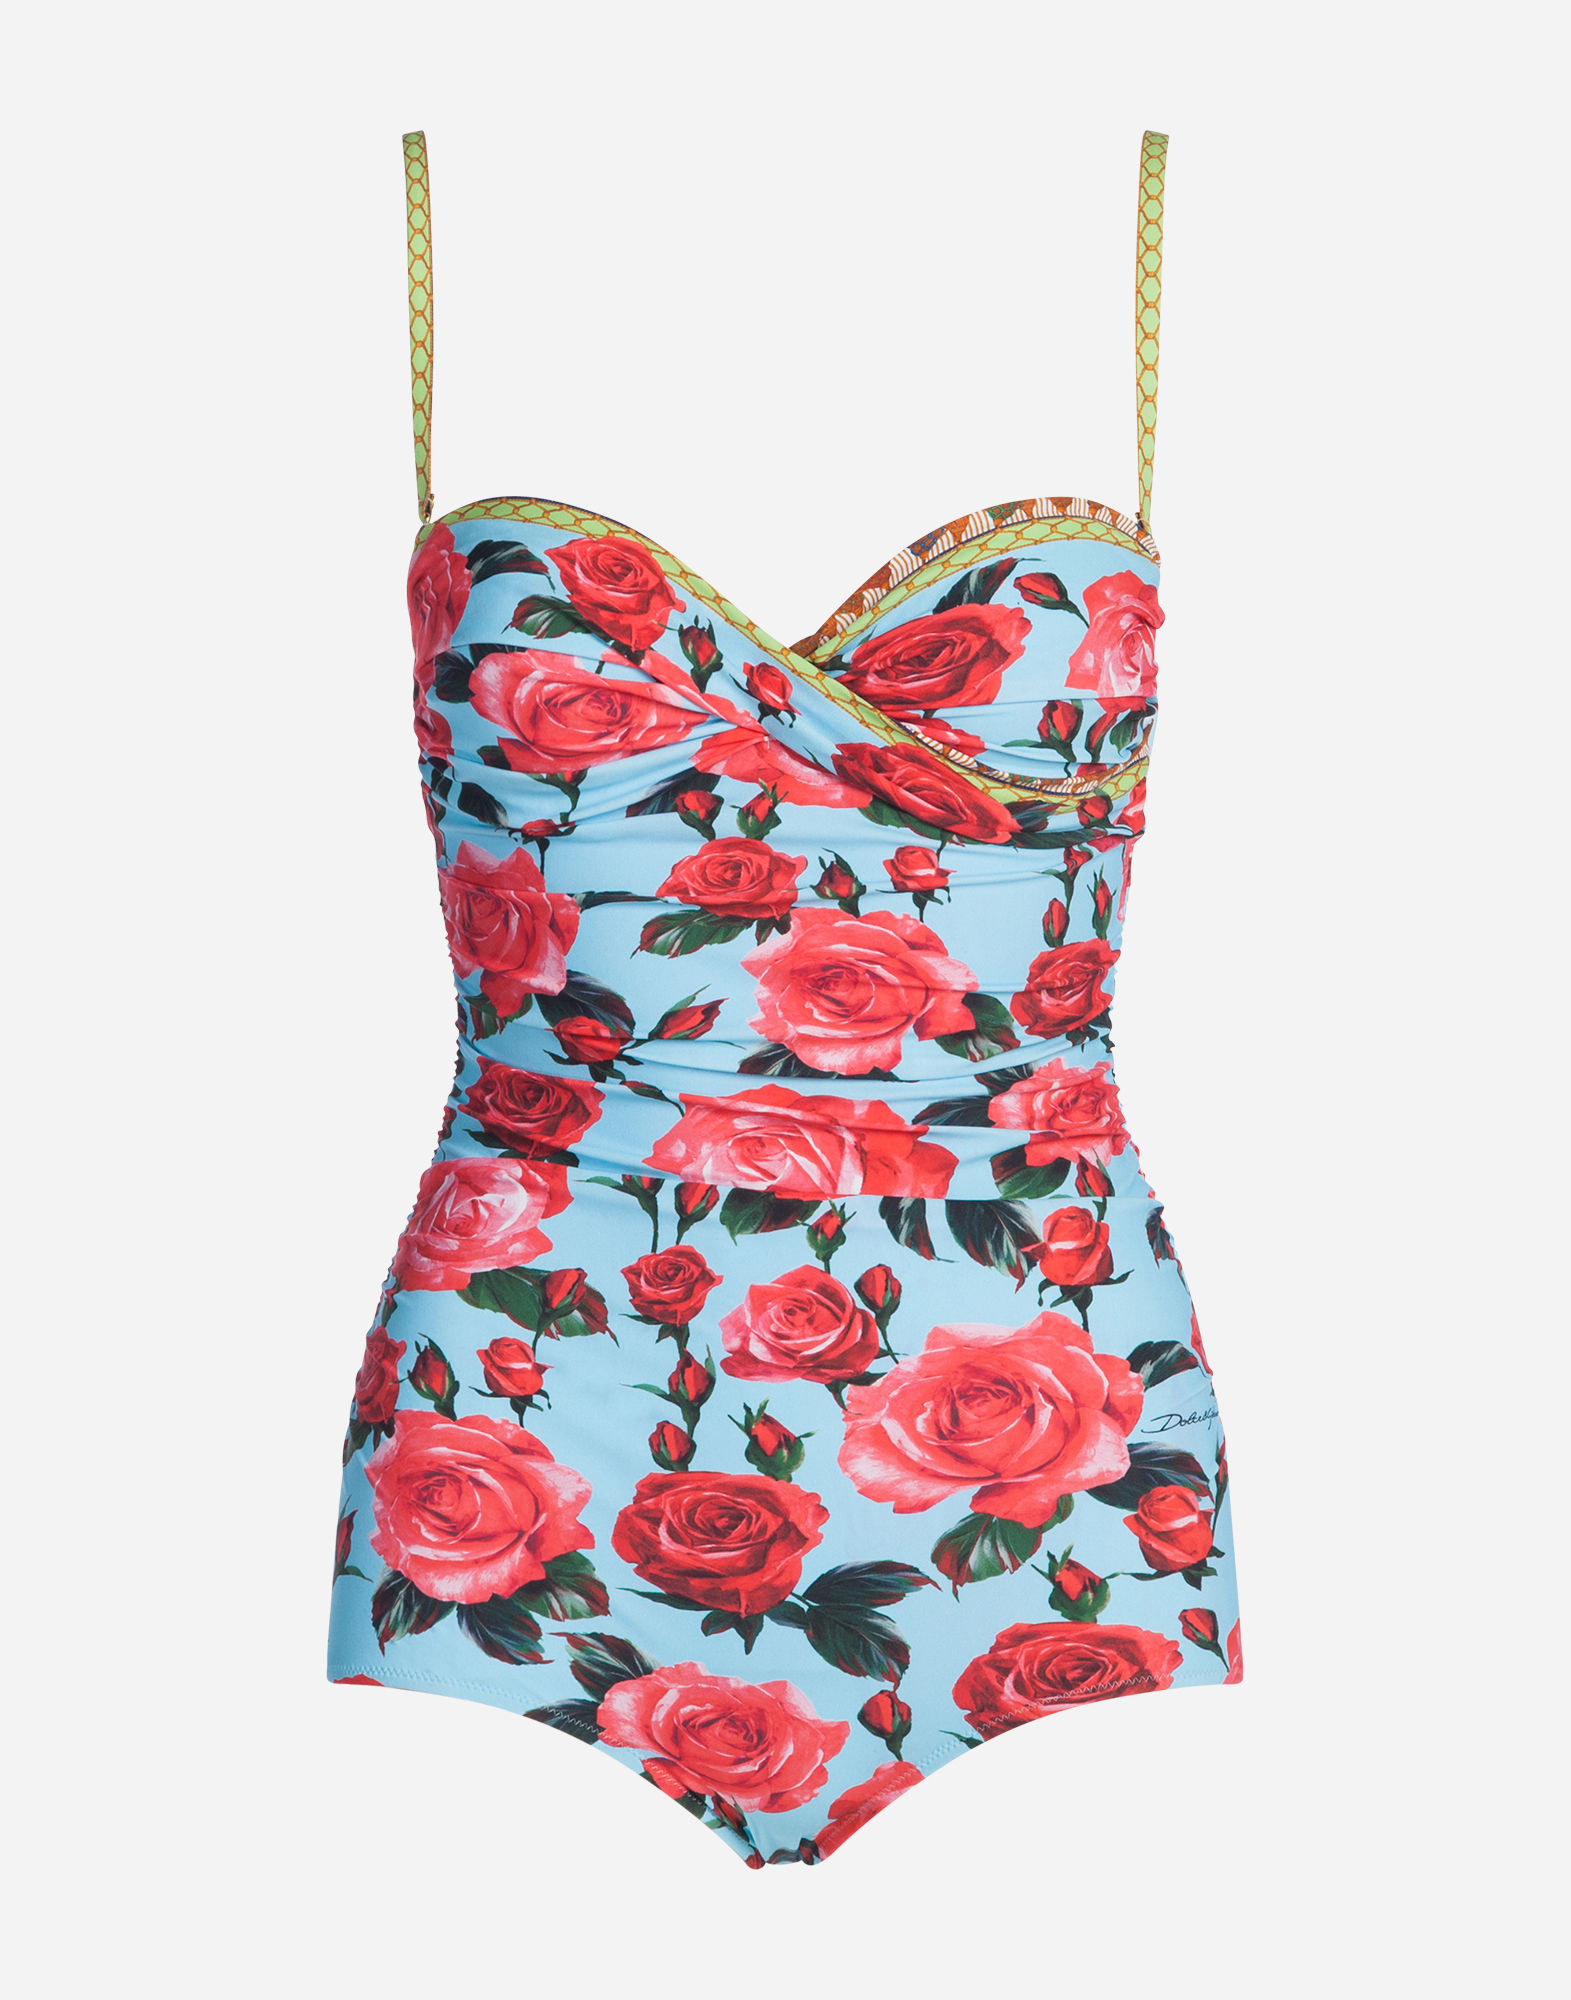 Dolce & Gabbana - Printed One Piece best one-piece swimsuits